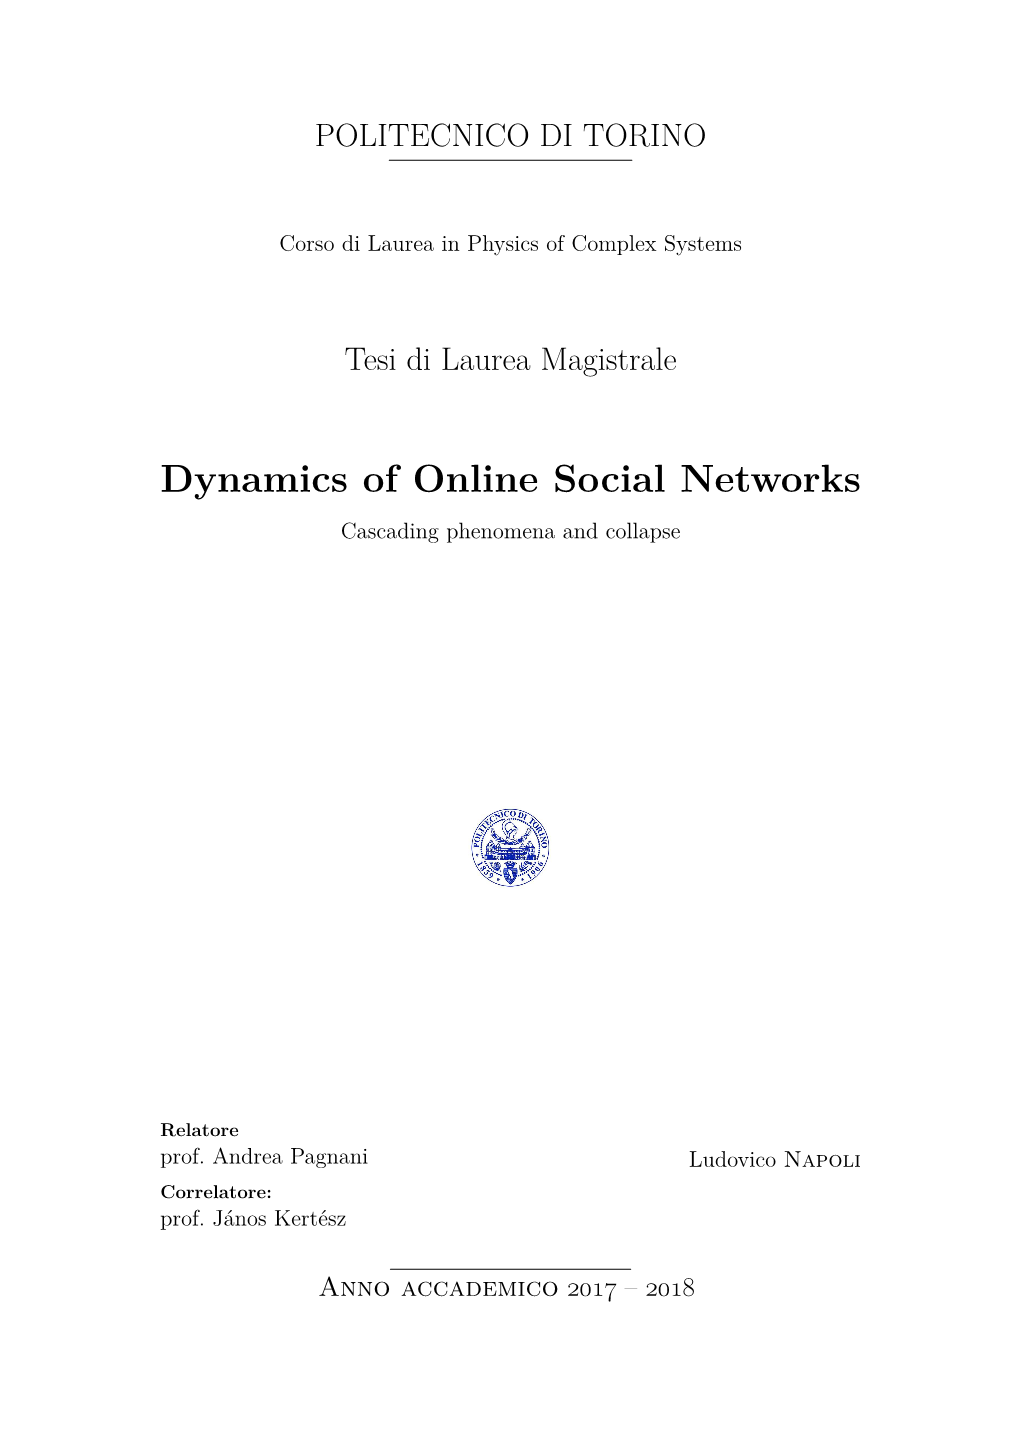 Dynamics of Online Social Networks Cascading Phenomena and Collapse